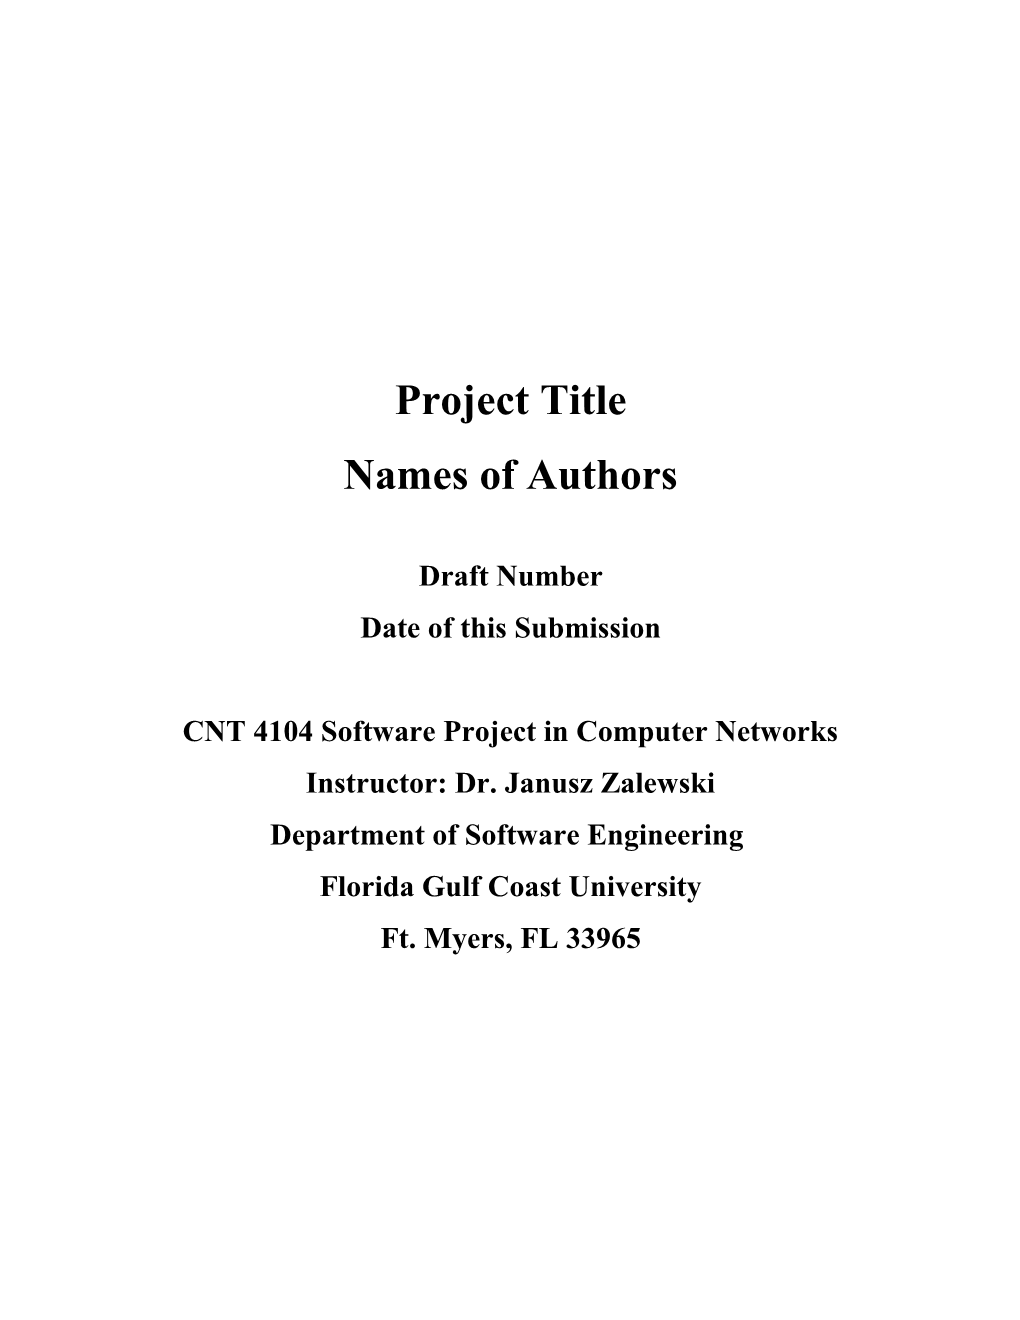 CNT 4104 Software Project in Computer Networks